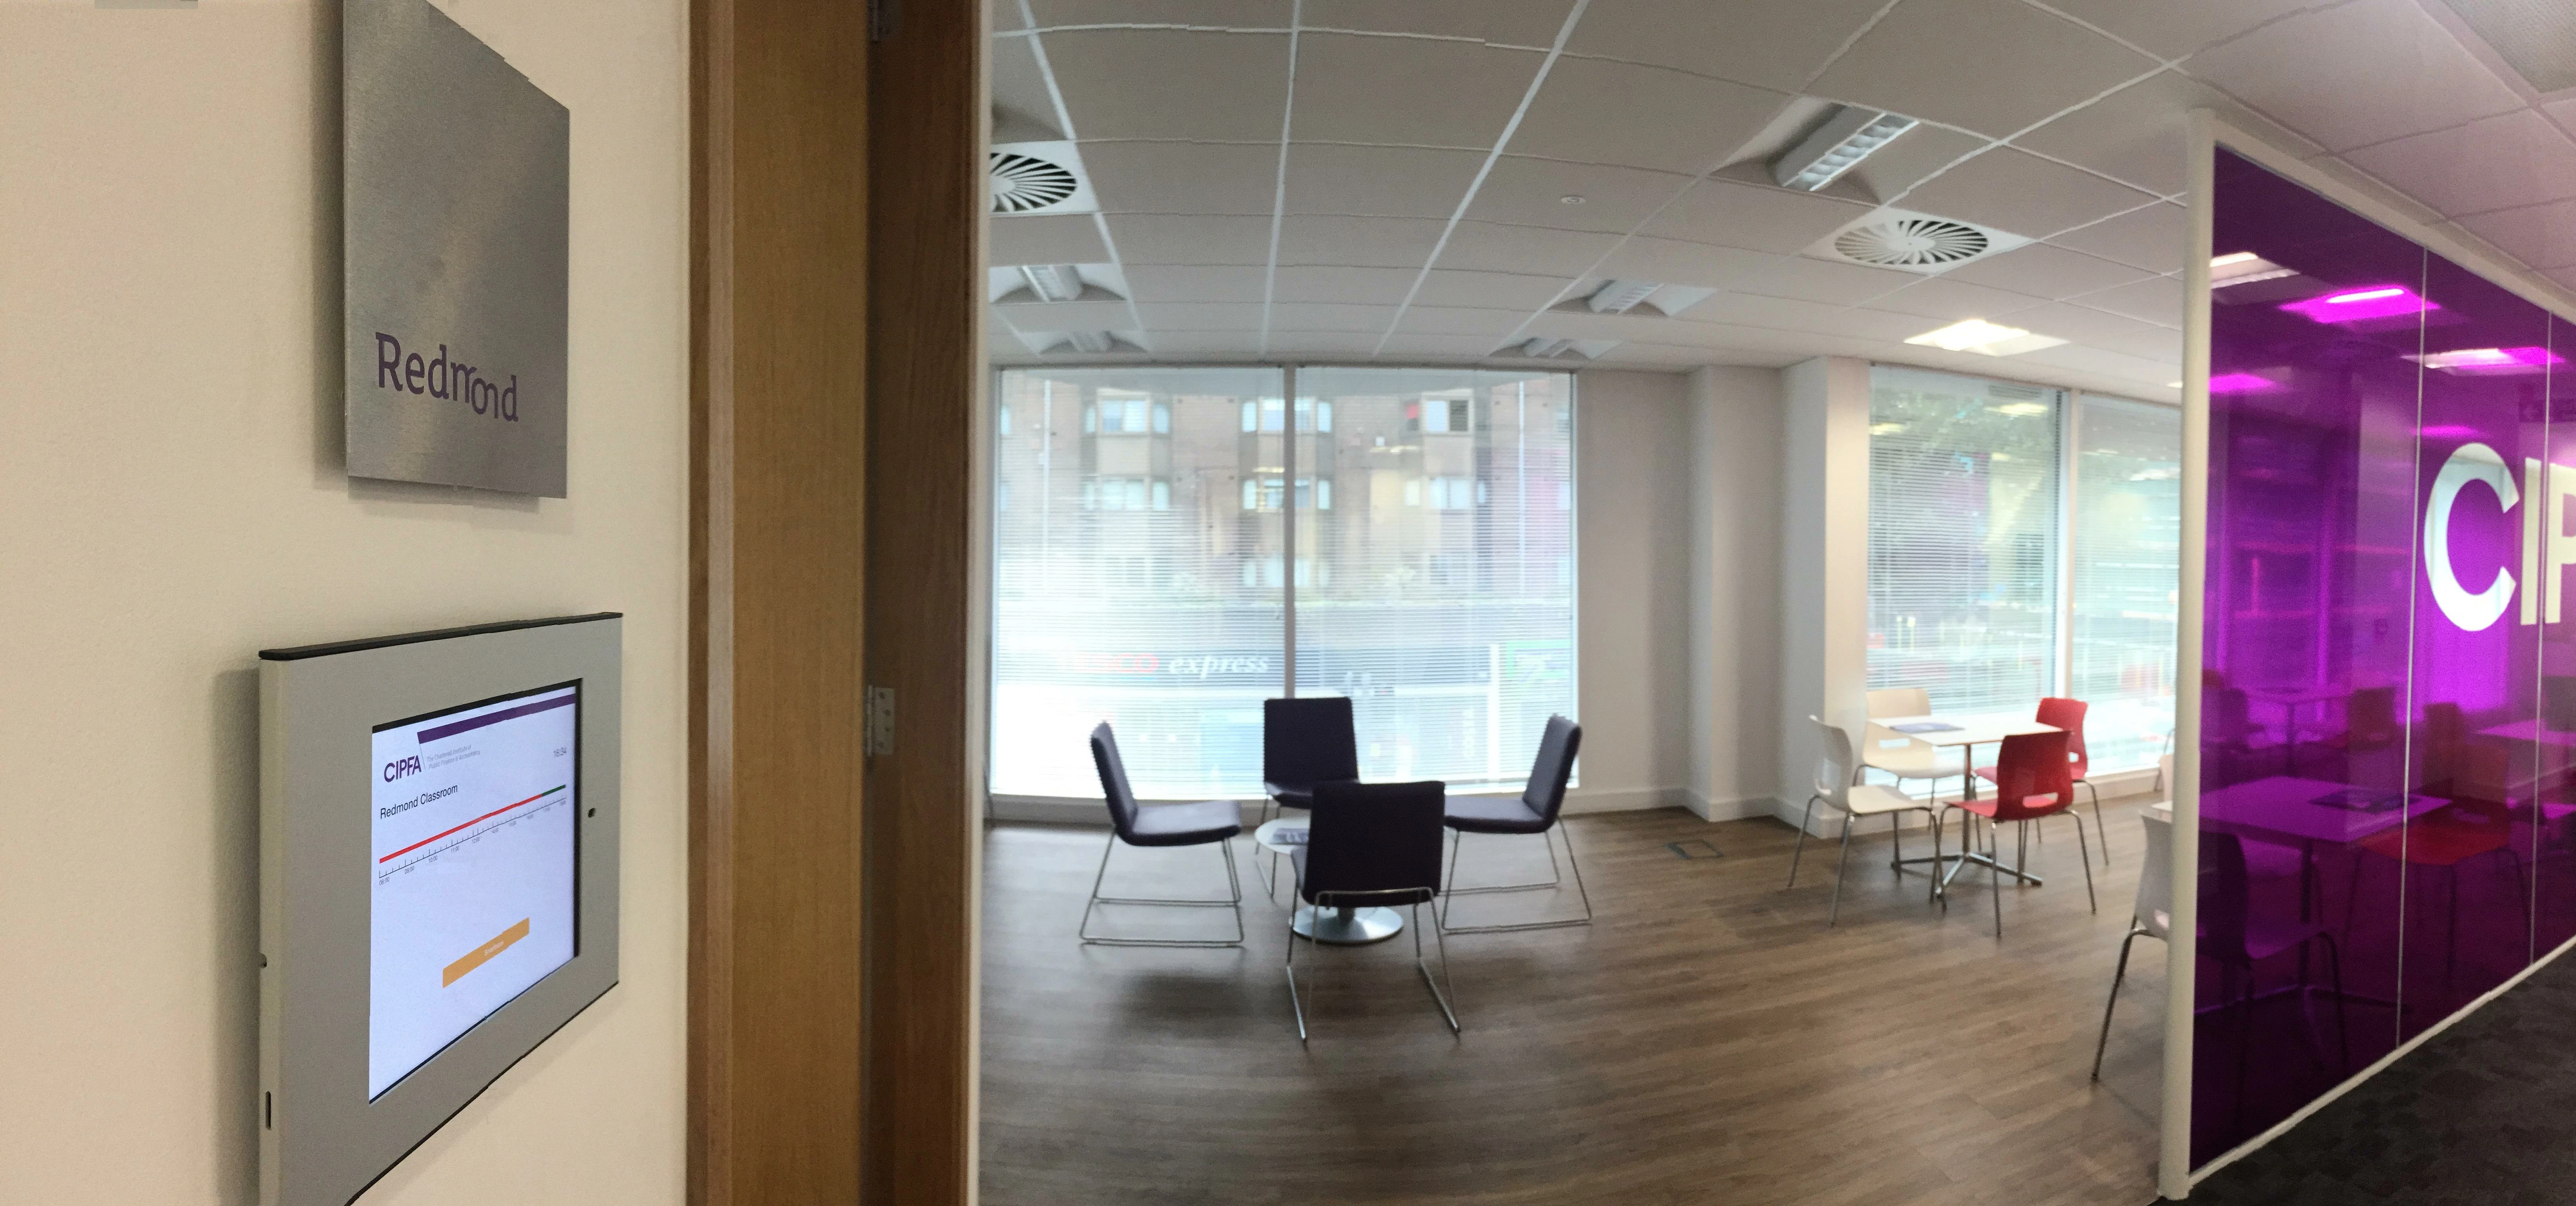 V1's room booking software in place at CIPFA's new headquarters